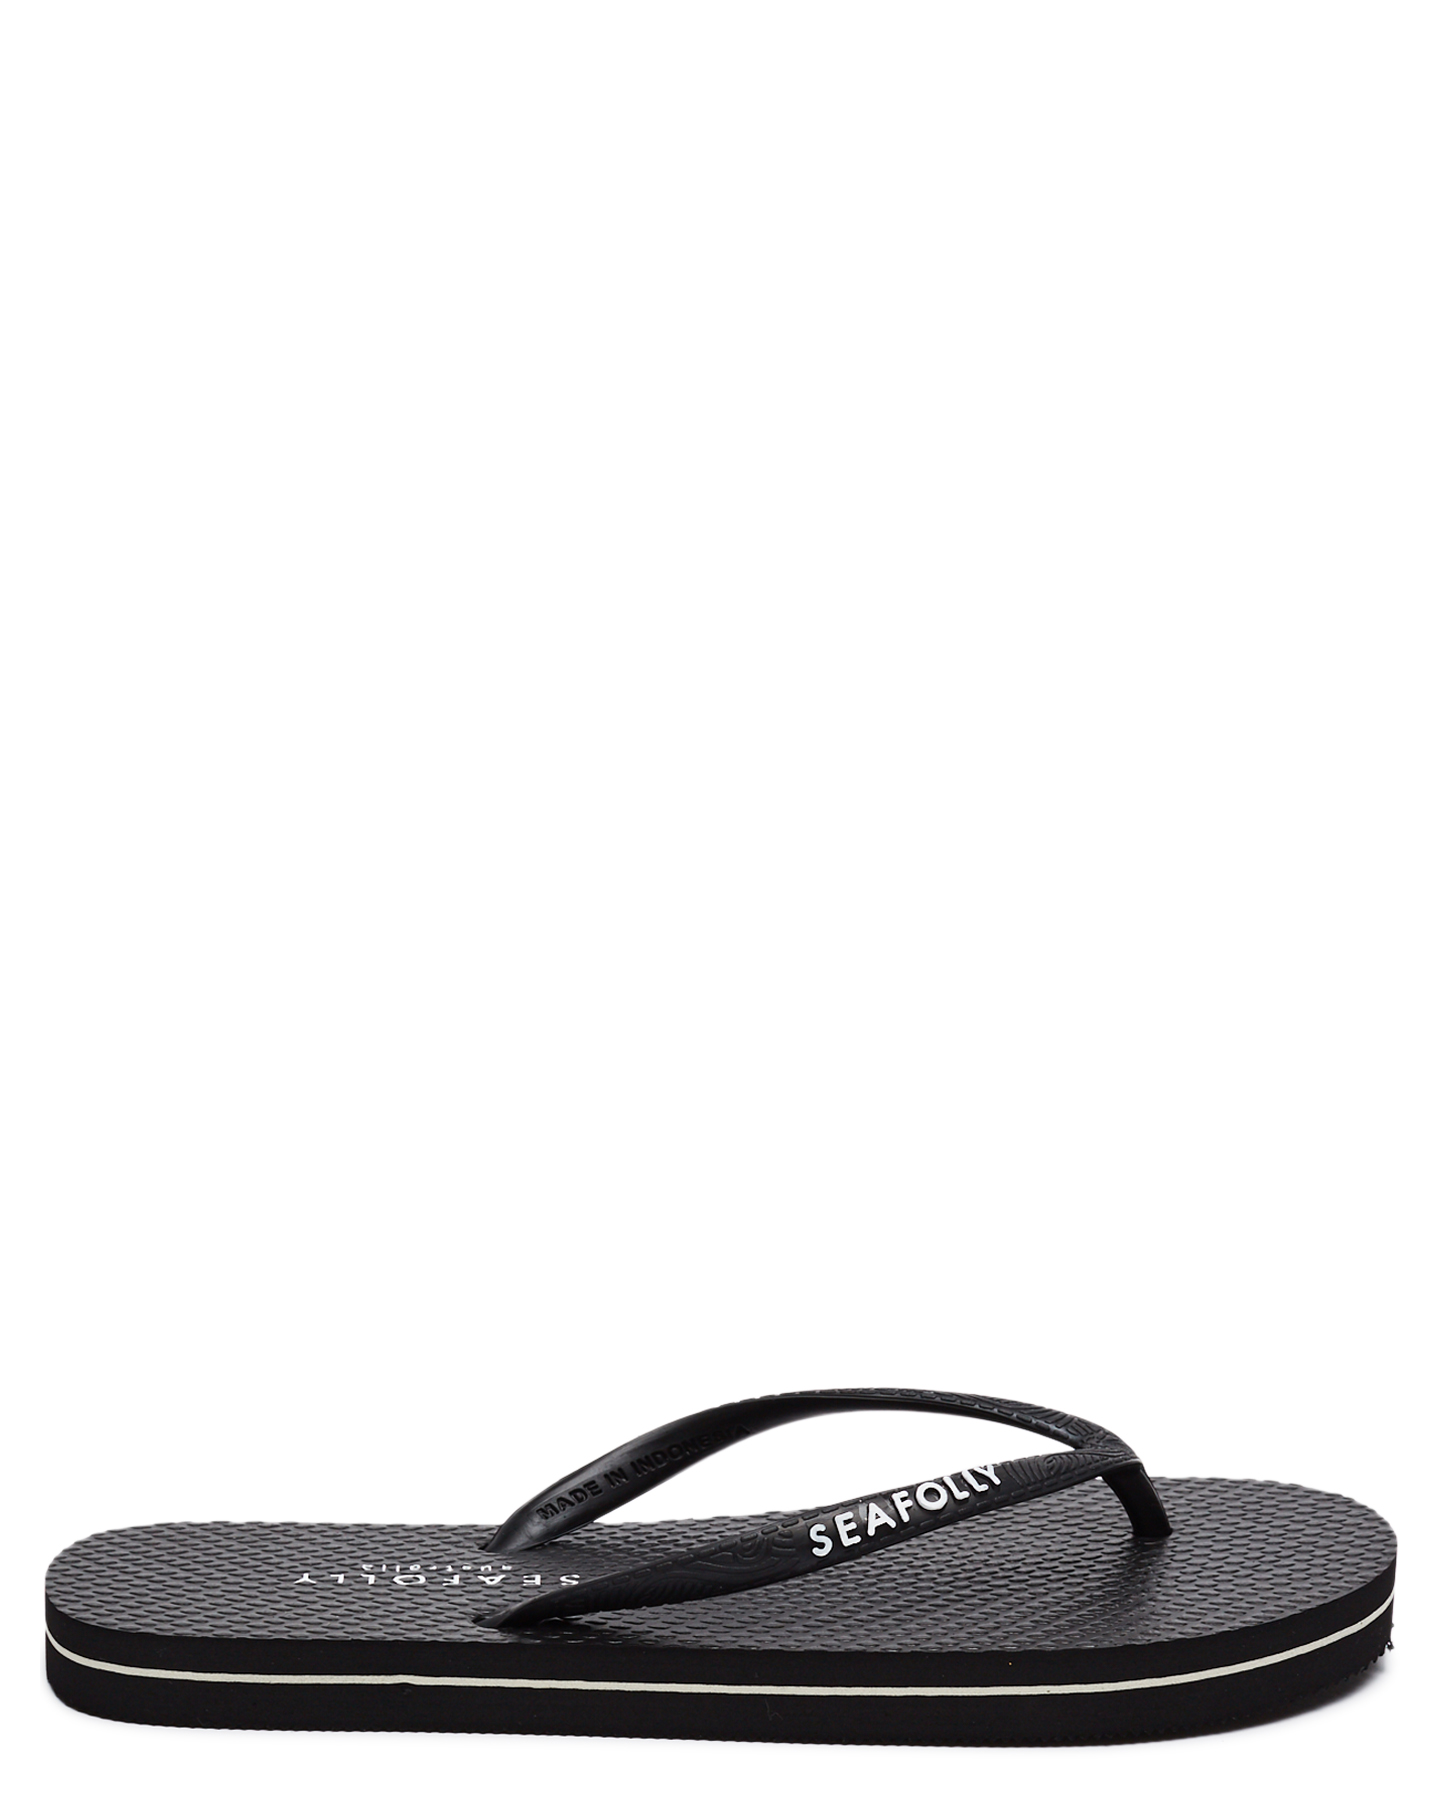 Seafolly Womens Walk About Divine Thong - Black | SurfStitch